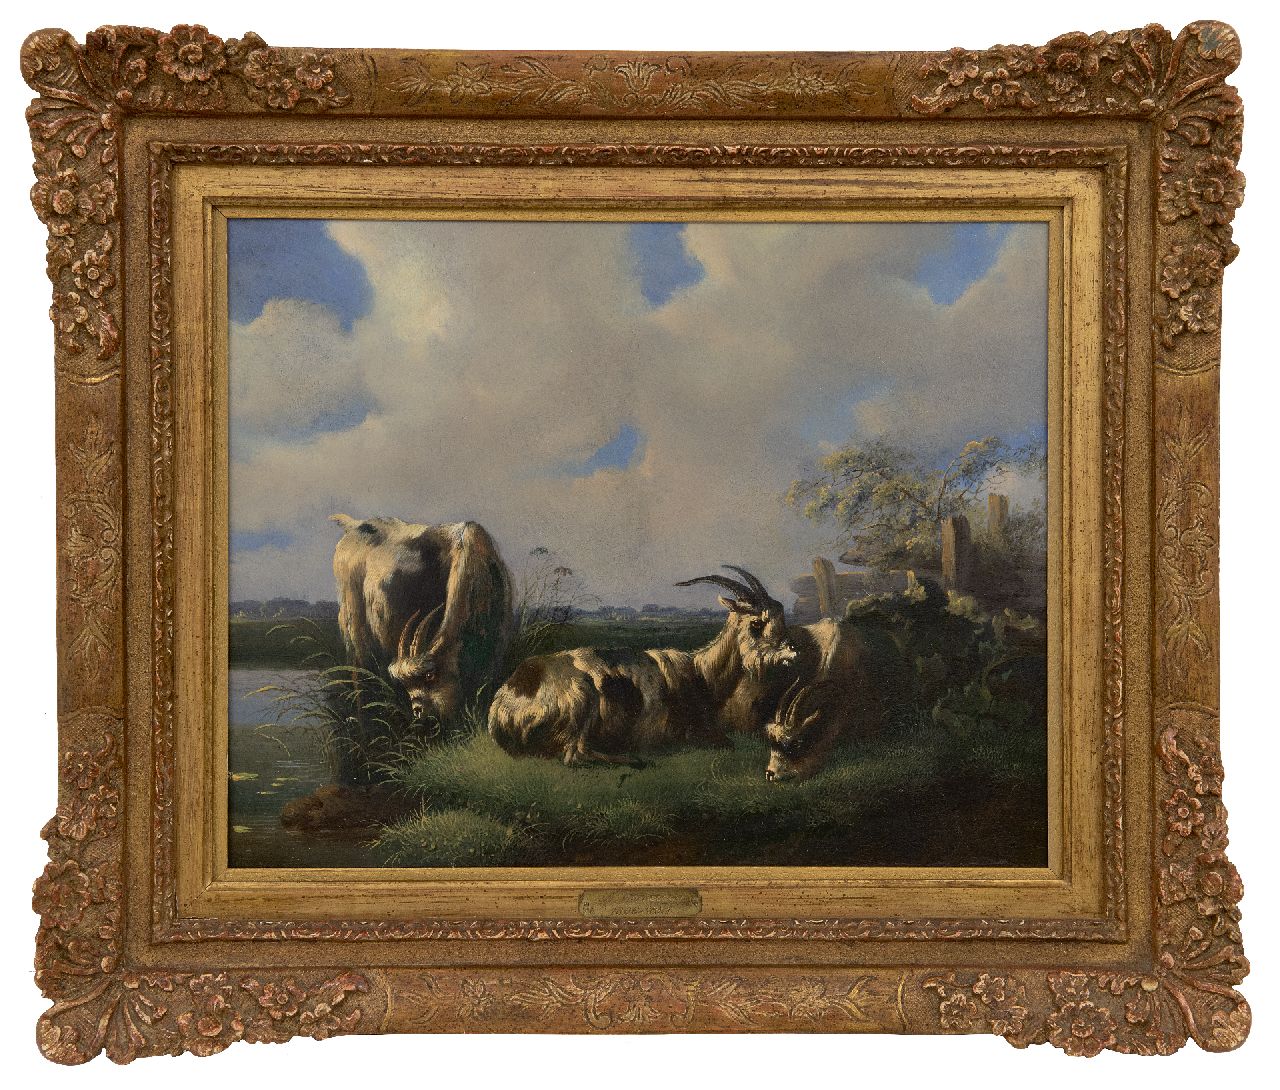 Verhoesen A.  | Albertus Verhoesen | Paintings offered for sale | Theww Dutch goats in a meadow, oil on panel 27.0 x 34.3 cm, signed l.r.